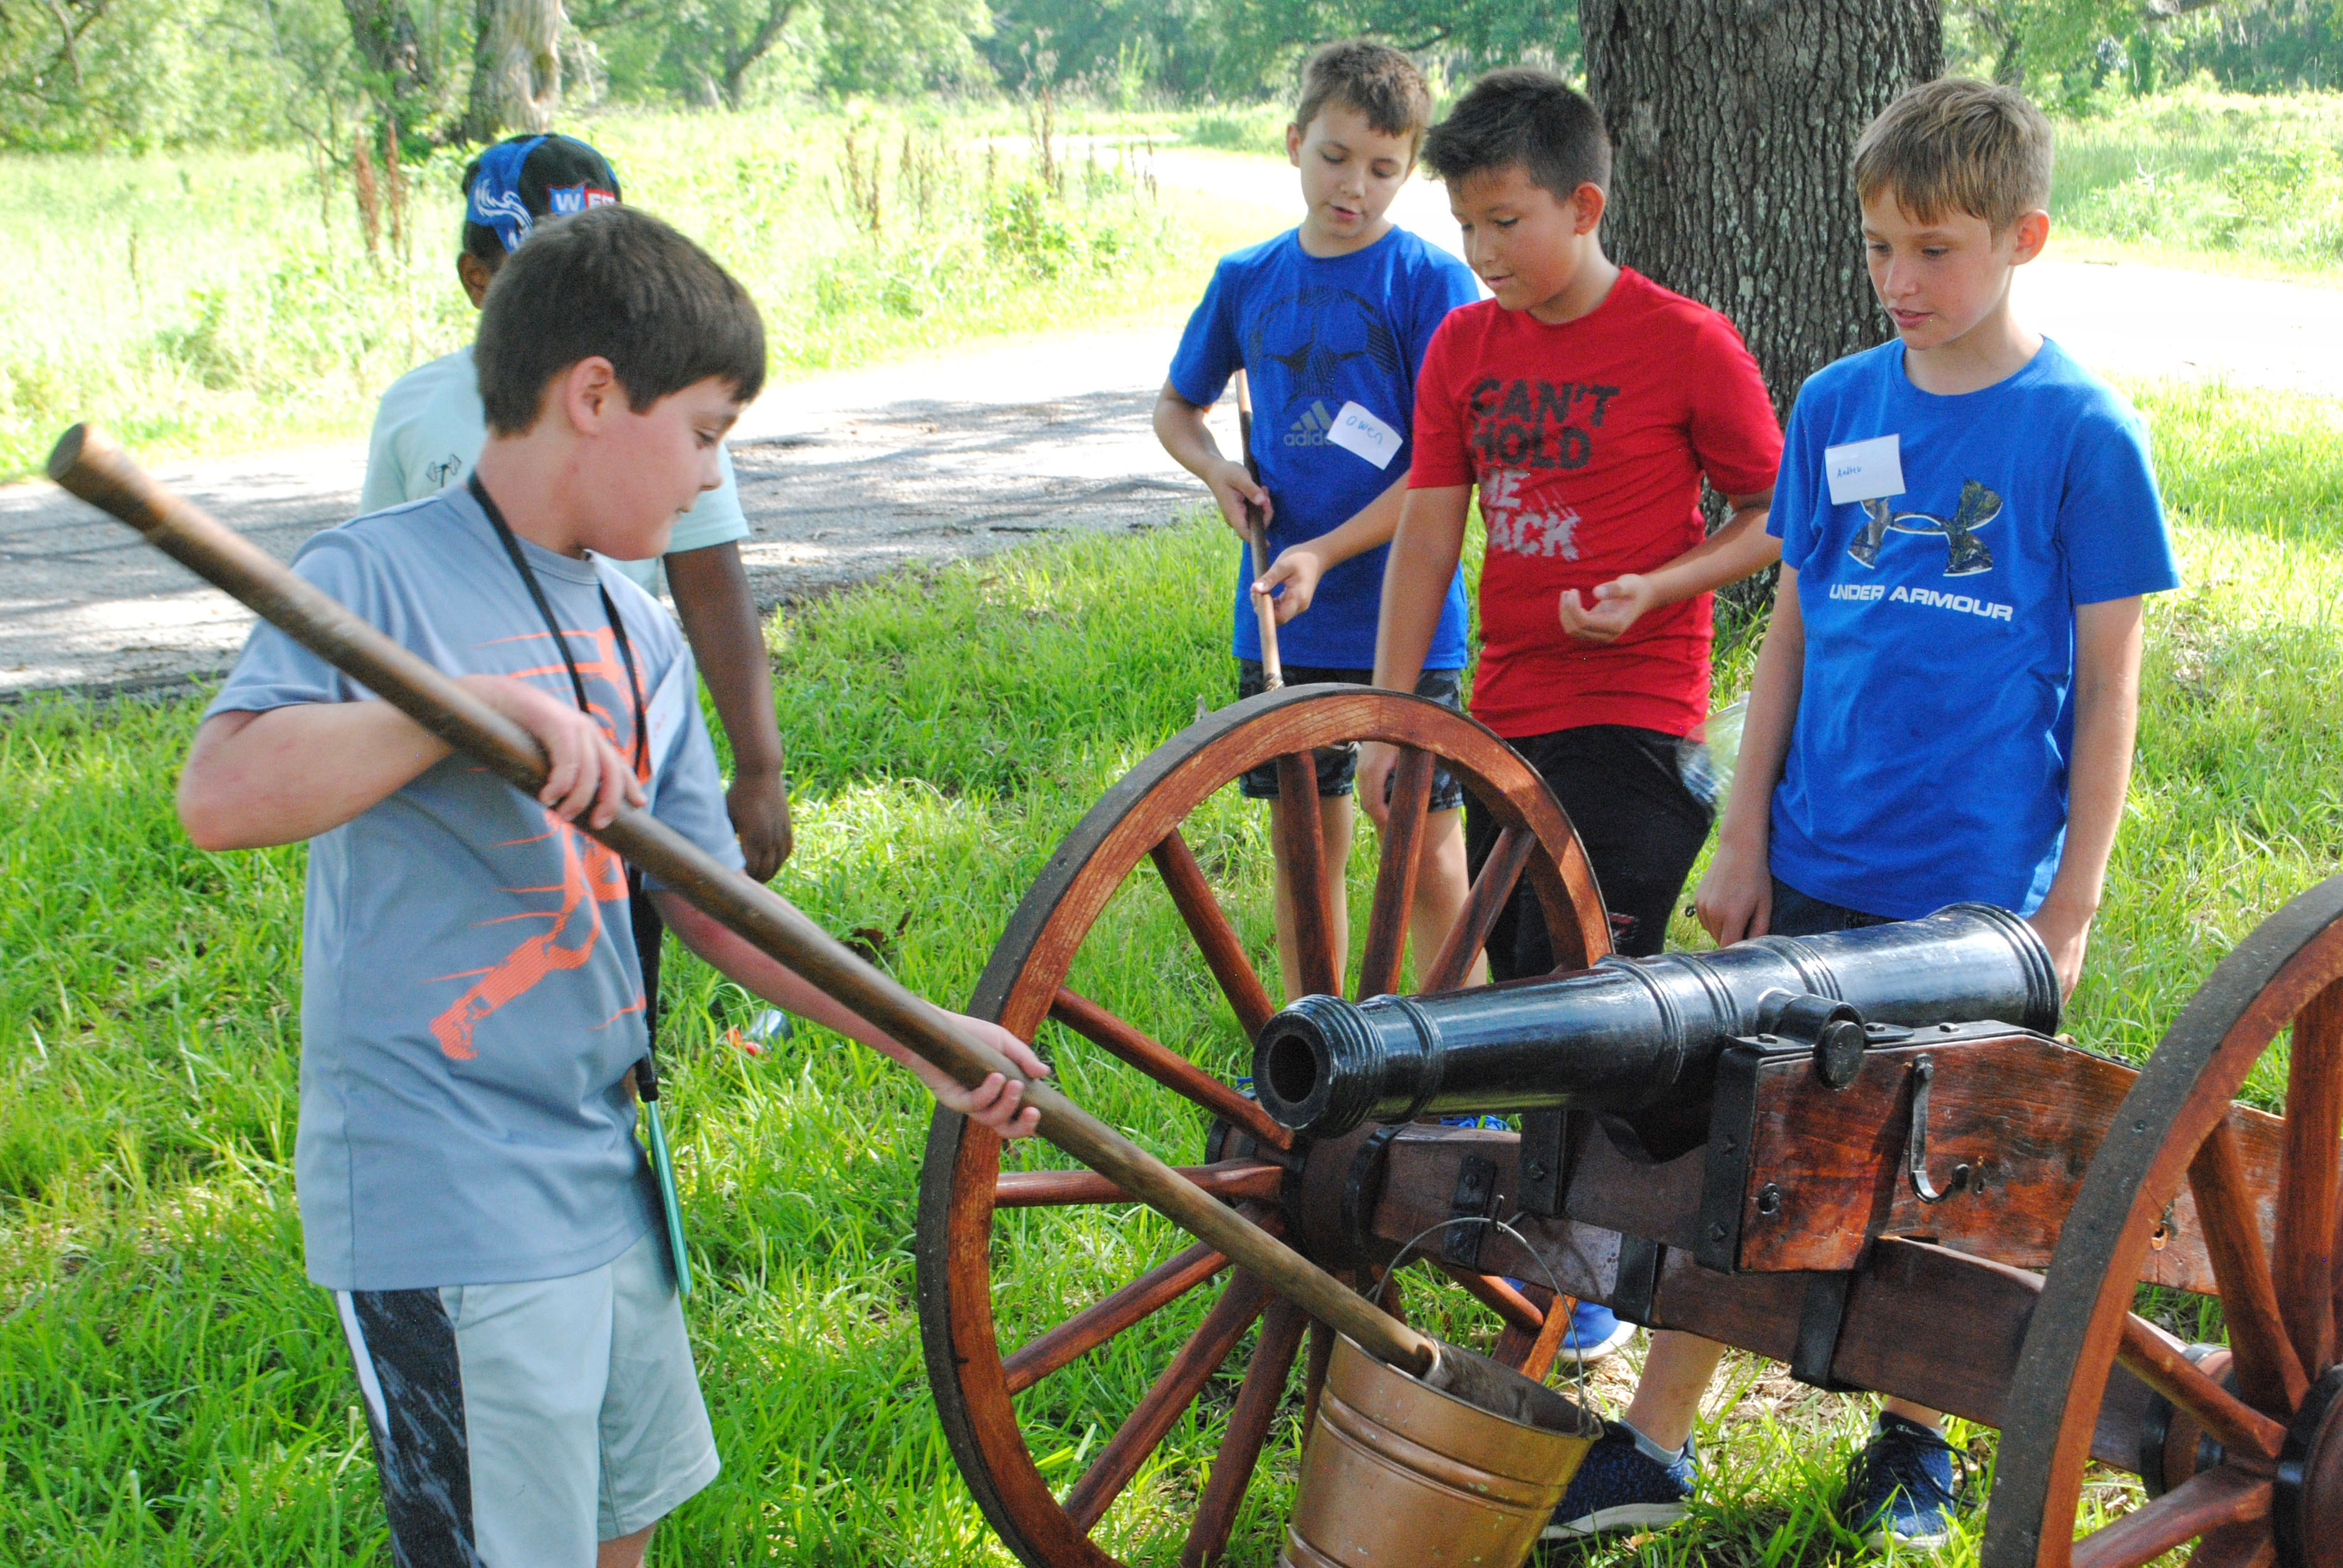 A boy swabs out a cannon while four other boys watch.